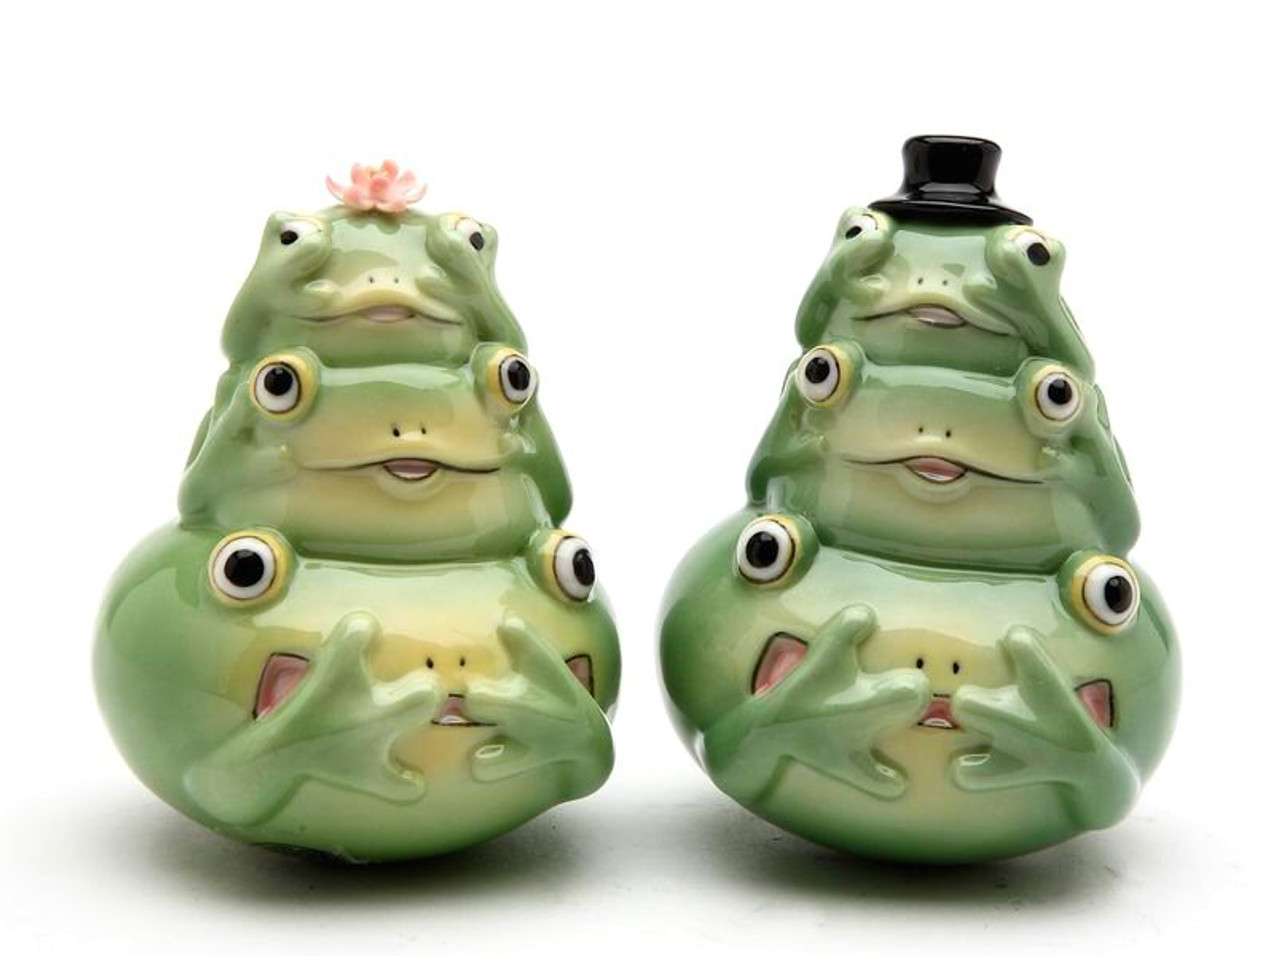 https://cdn11.bigcommerce.com/s-oo0gdojvjo/images/stencil/1280x1280/products/3920/5942/61533-male-and-female-fairy-frogs-ceramic-salt-and-pepper-shakers-set-of-4__97068.1536906690.jpg?c=2